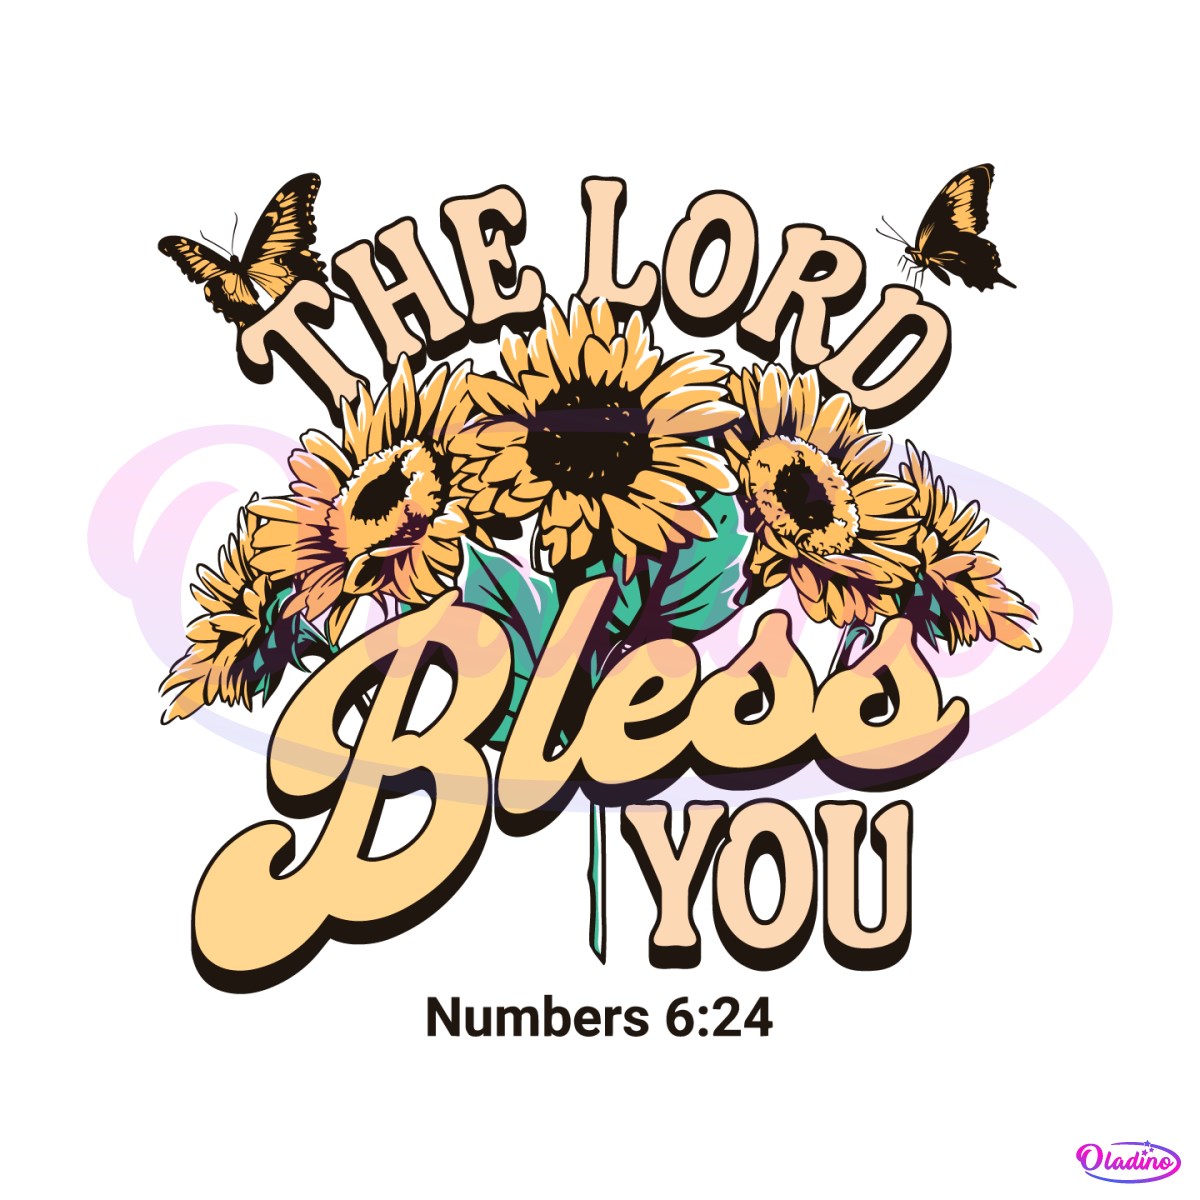 the-lord-bless-you-easter-bible-verse-png